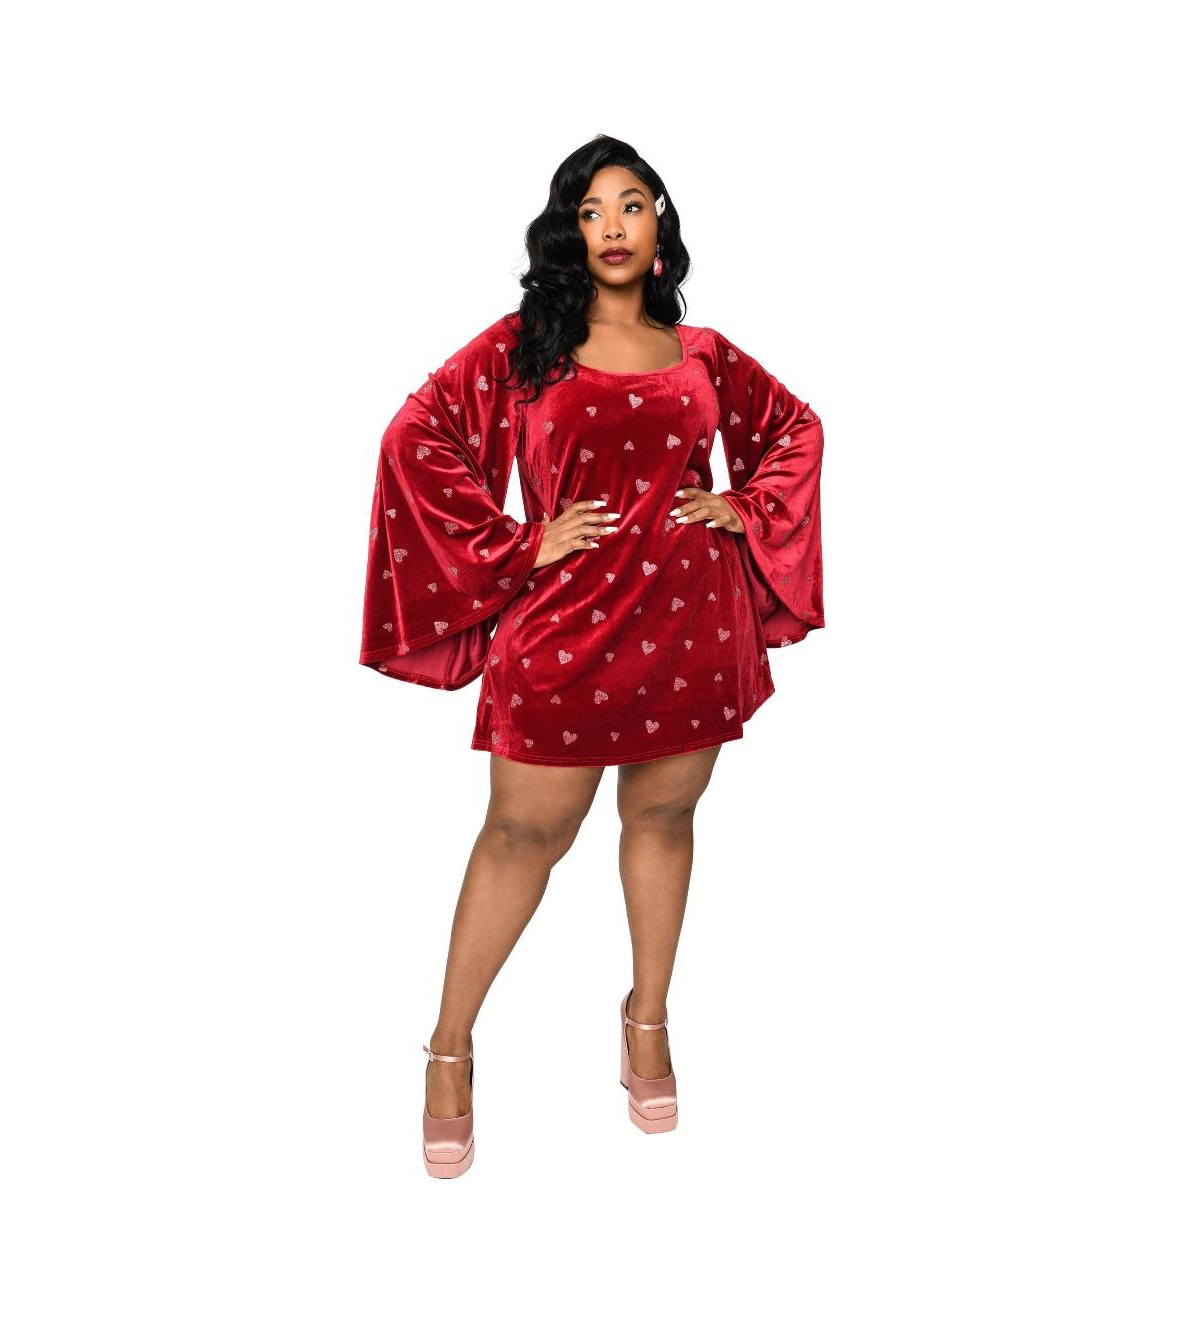 Plus Size Angel Sleeve Downtown Scene Mini Fit & Flare Dress - Red/pink hearts